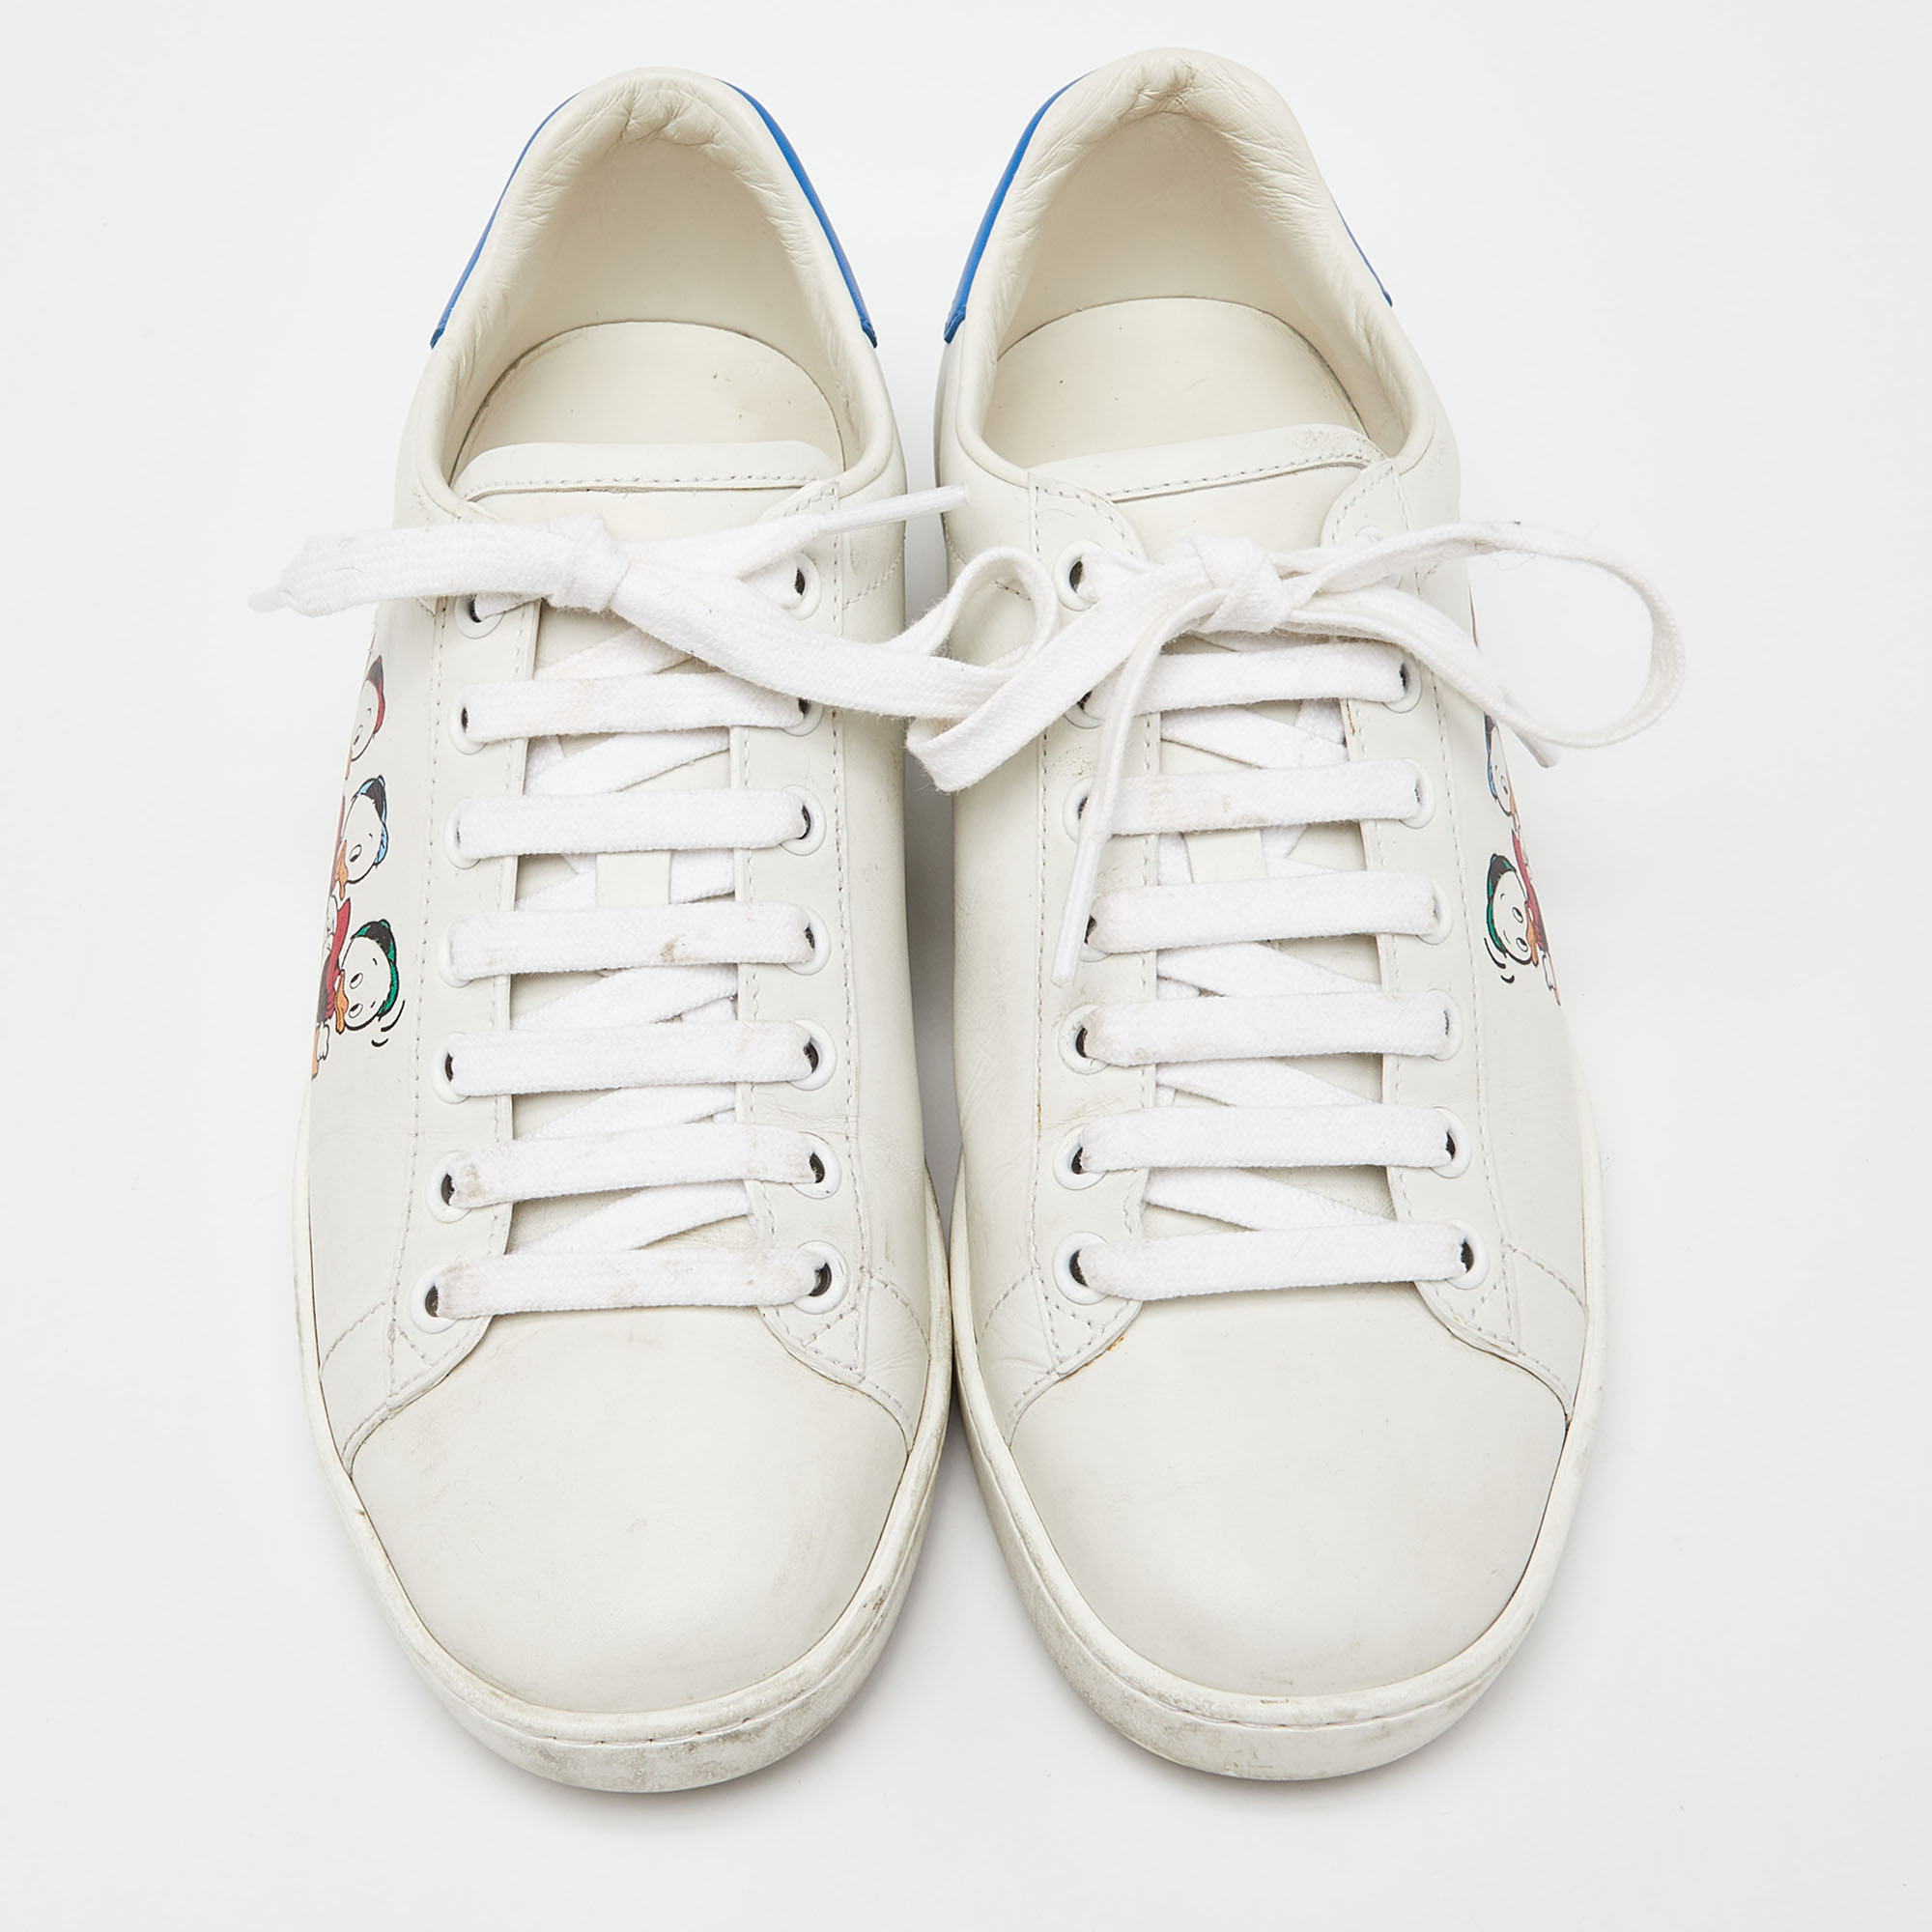 Gucci X Disney White/Blue Leather Huey, Dewey And Louie Ace Sneakers Size 36